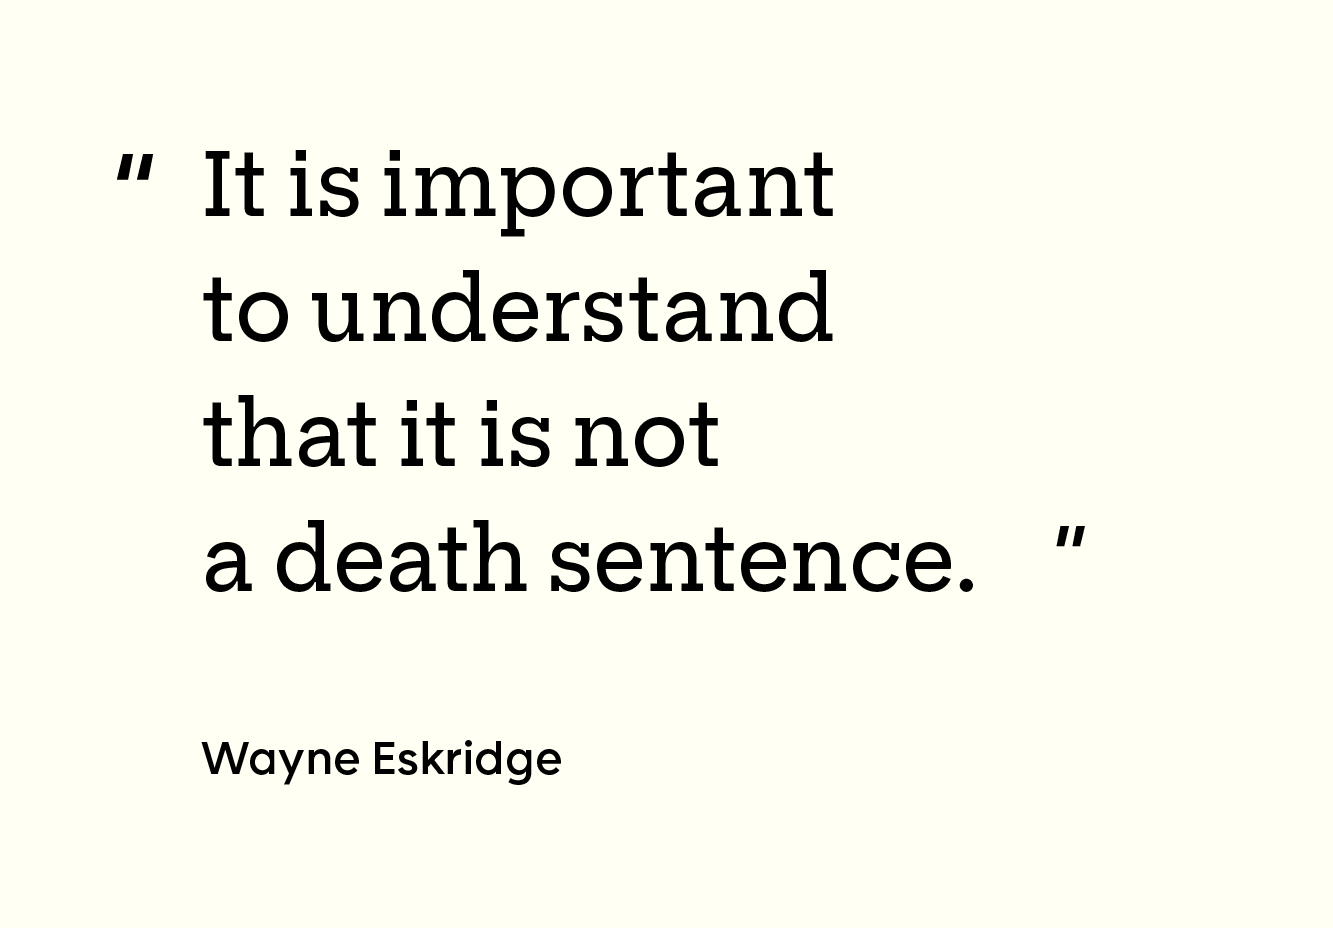 Image of the quote “It is important to understand that it is not a death sentence, necessarily.”